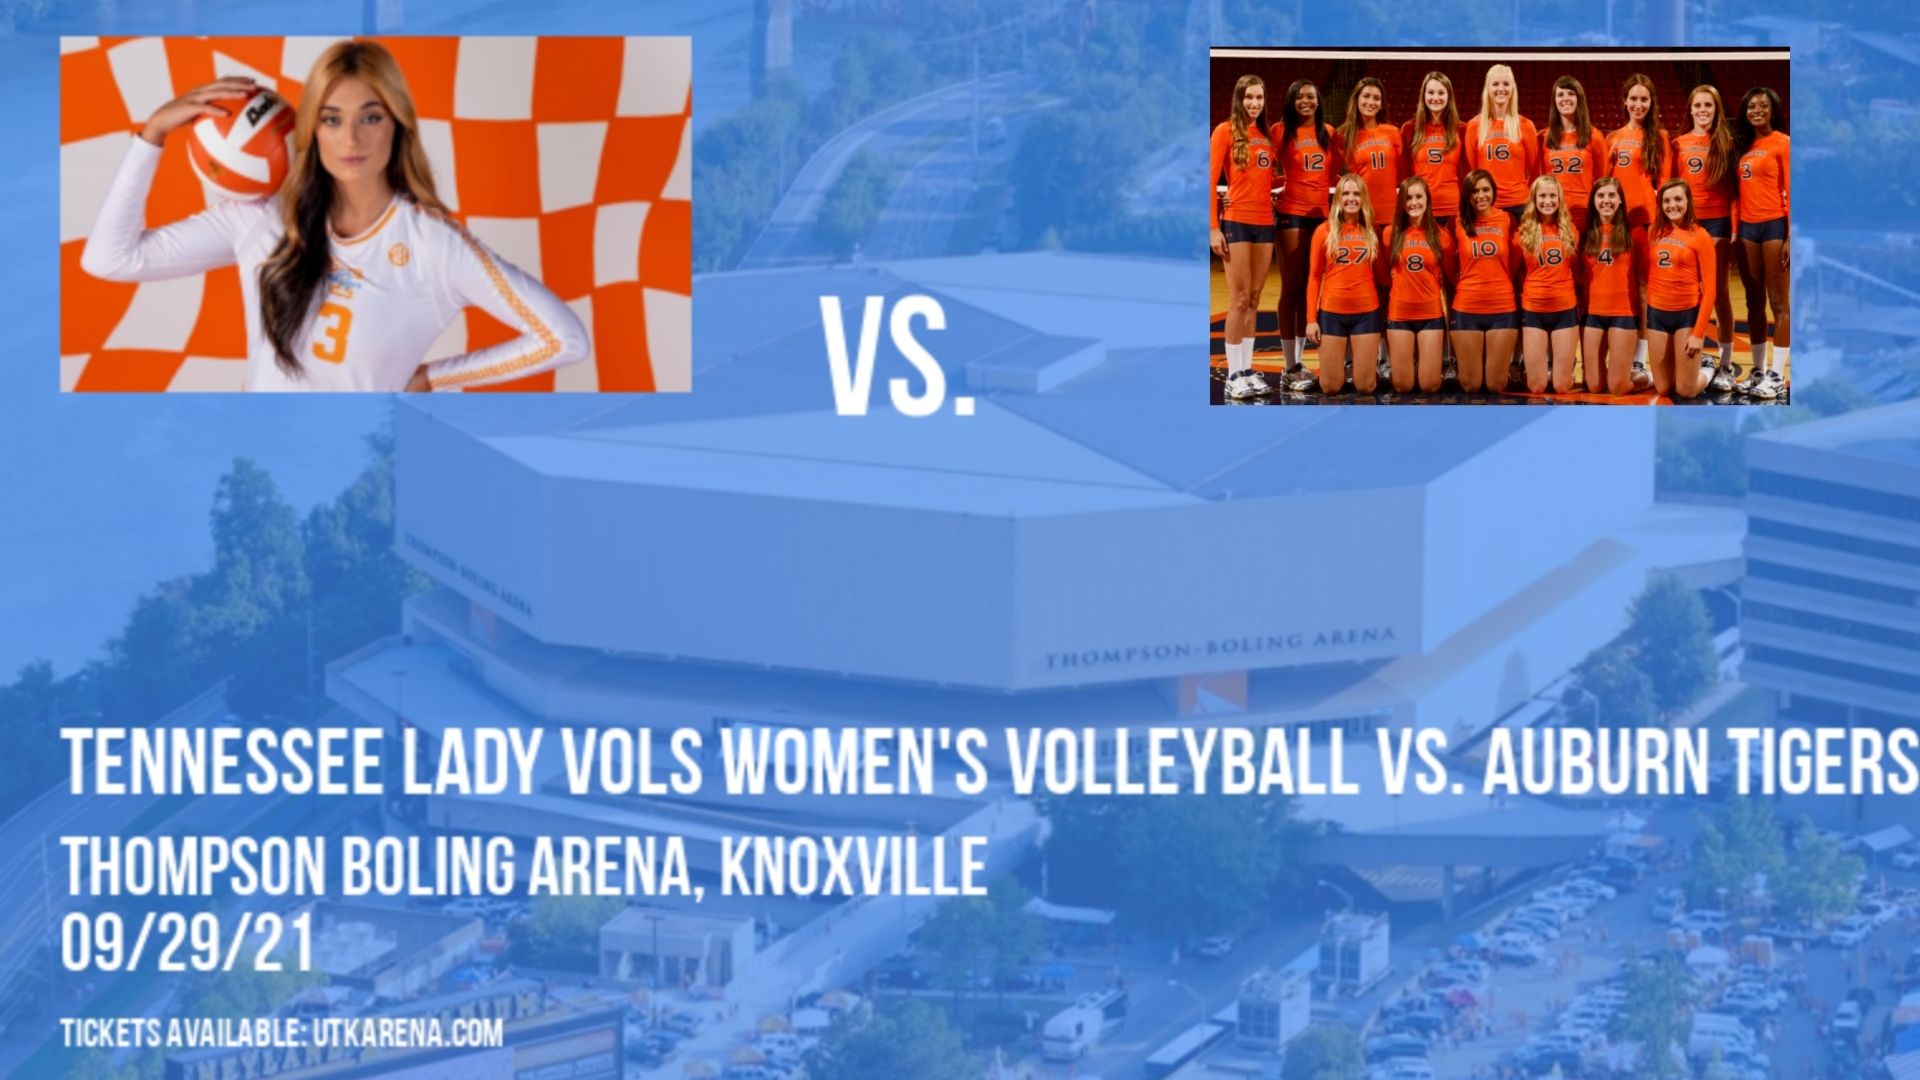 Tennessee Lady Vols Women's Volleyball vs. Auburn Tigers at Thompson Boling Arena